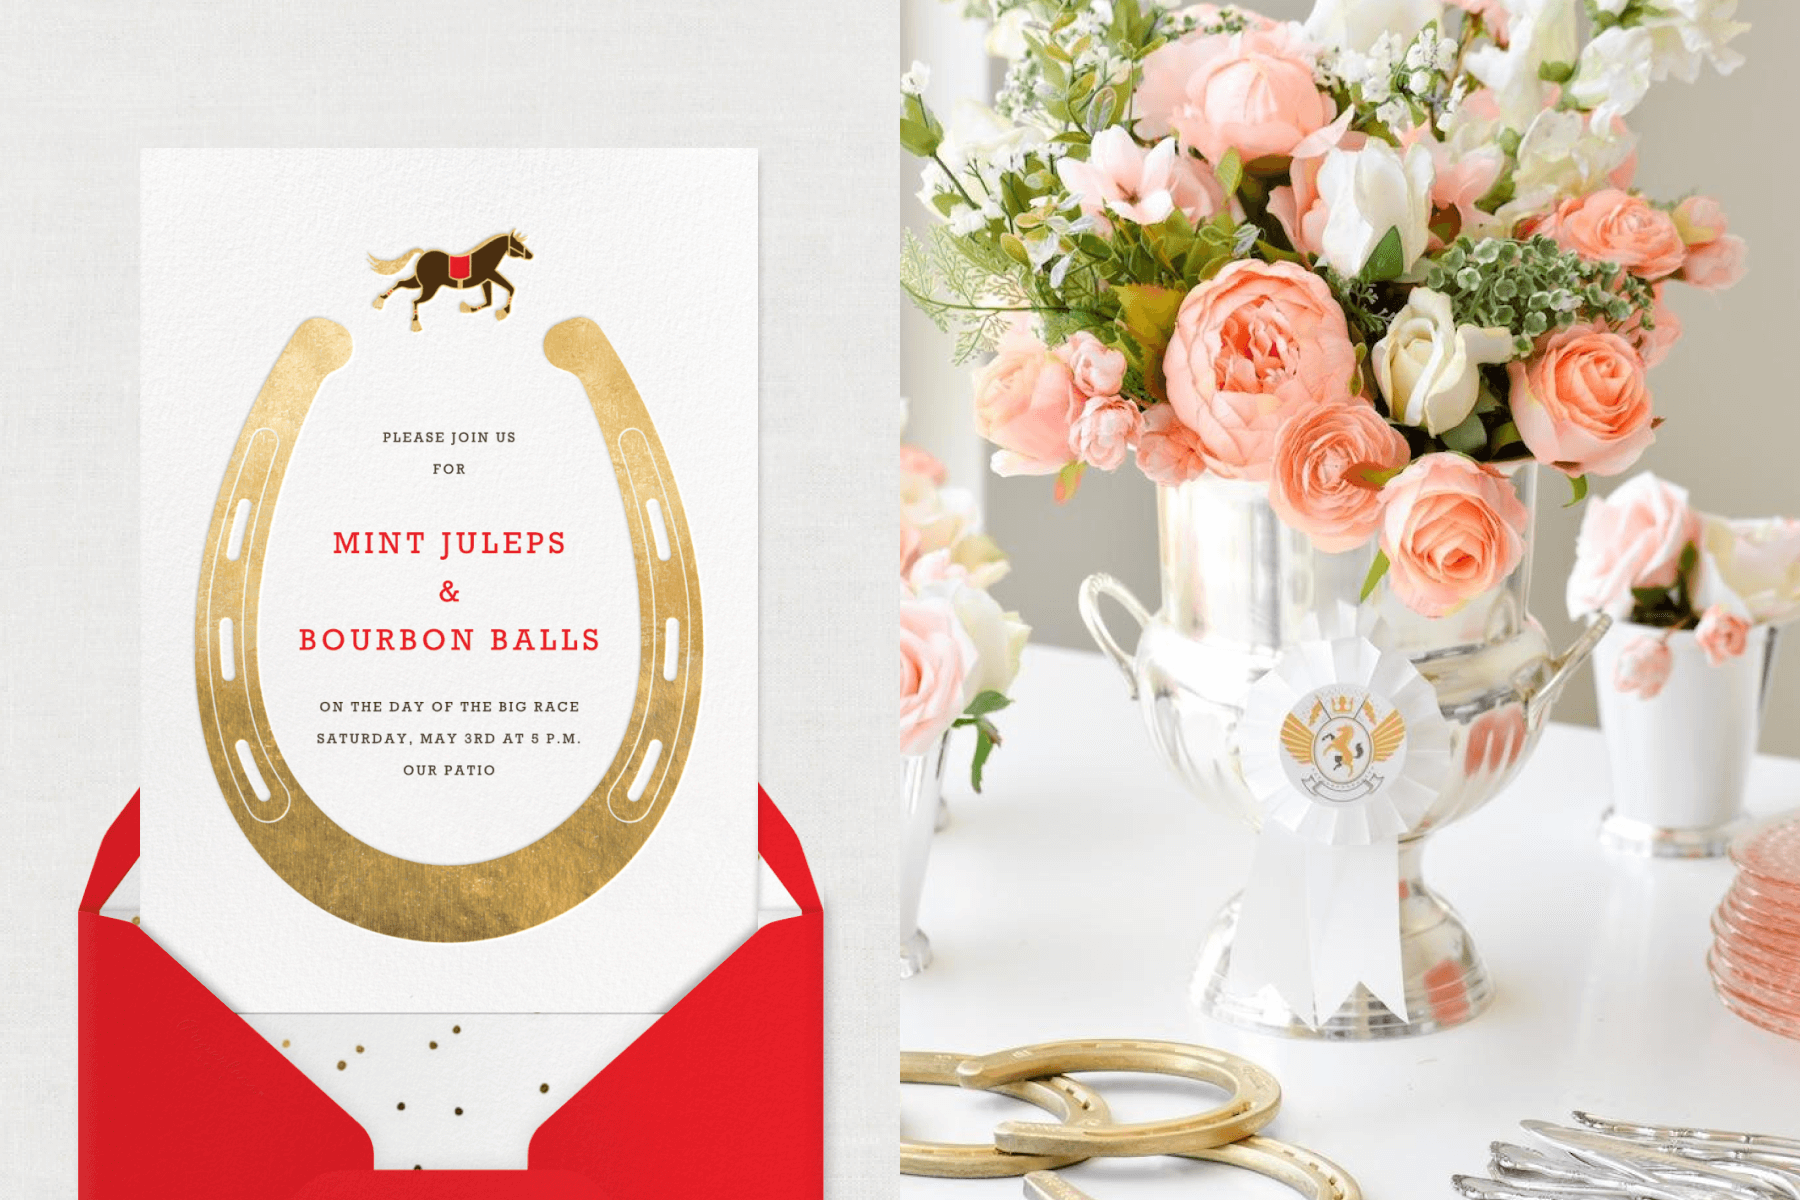 Left: A white invitation with a large gold horseshoe and a small galloping horse above it emerges from a red envelope. Right: A silver vase with a white prize ribbon on it is filled with pink, white, and green flowers on a table with gold horseshoes.